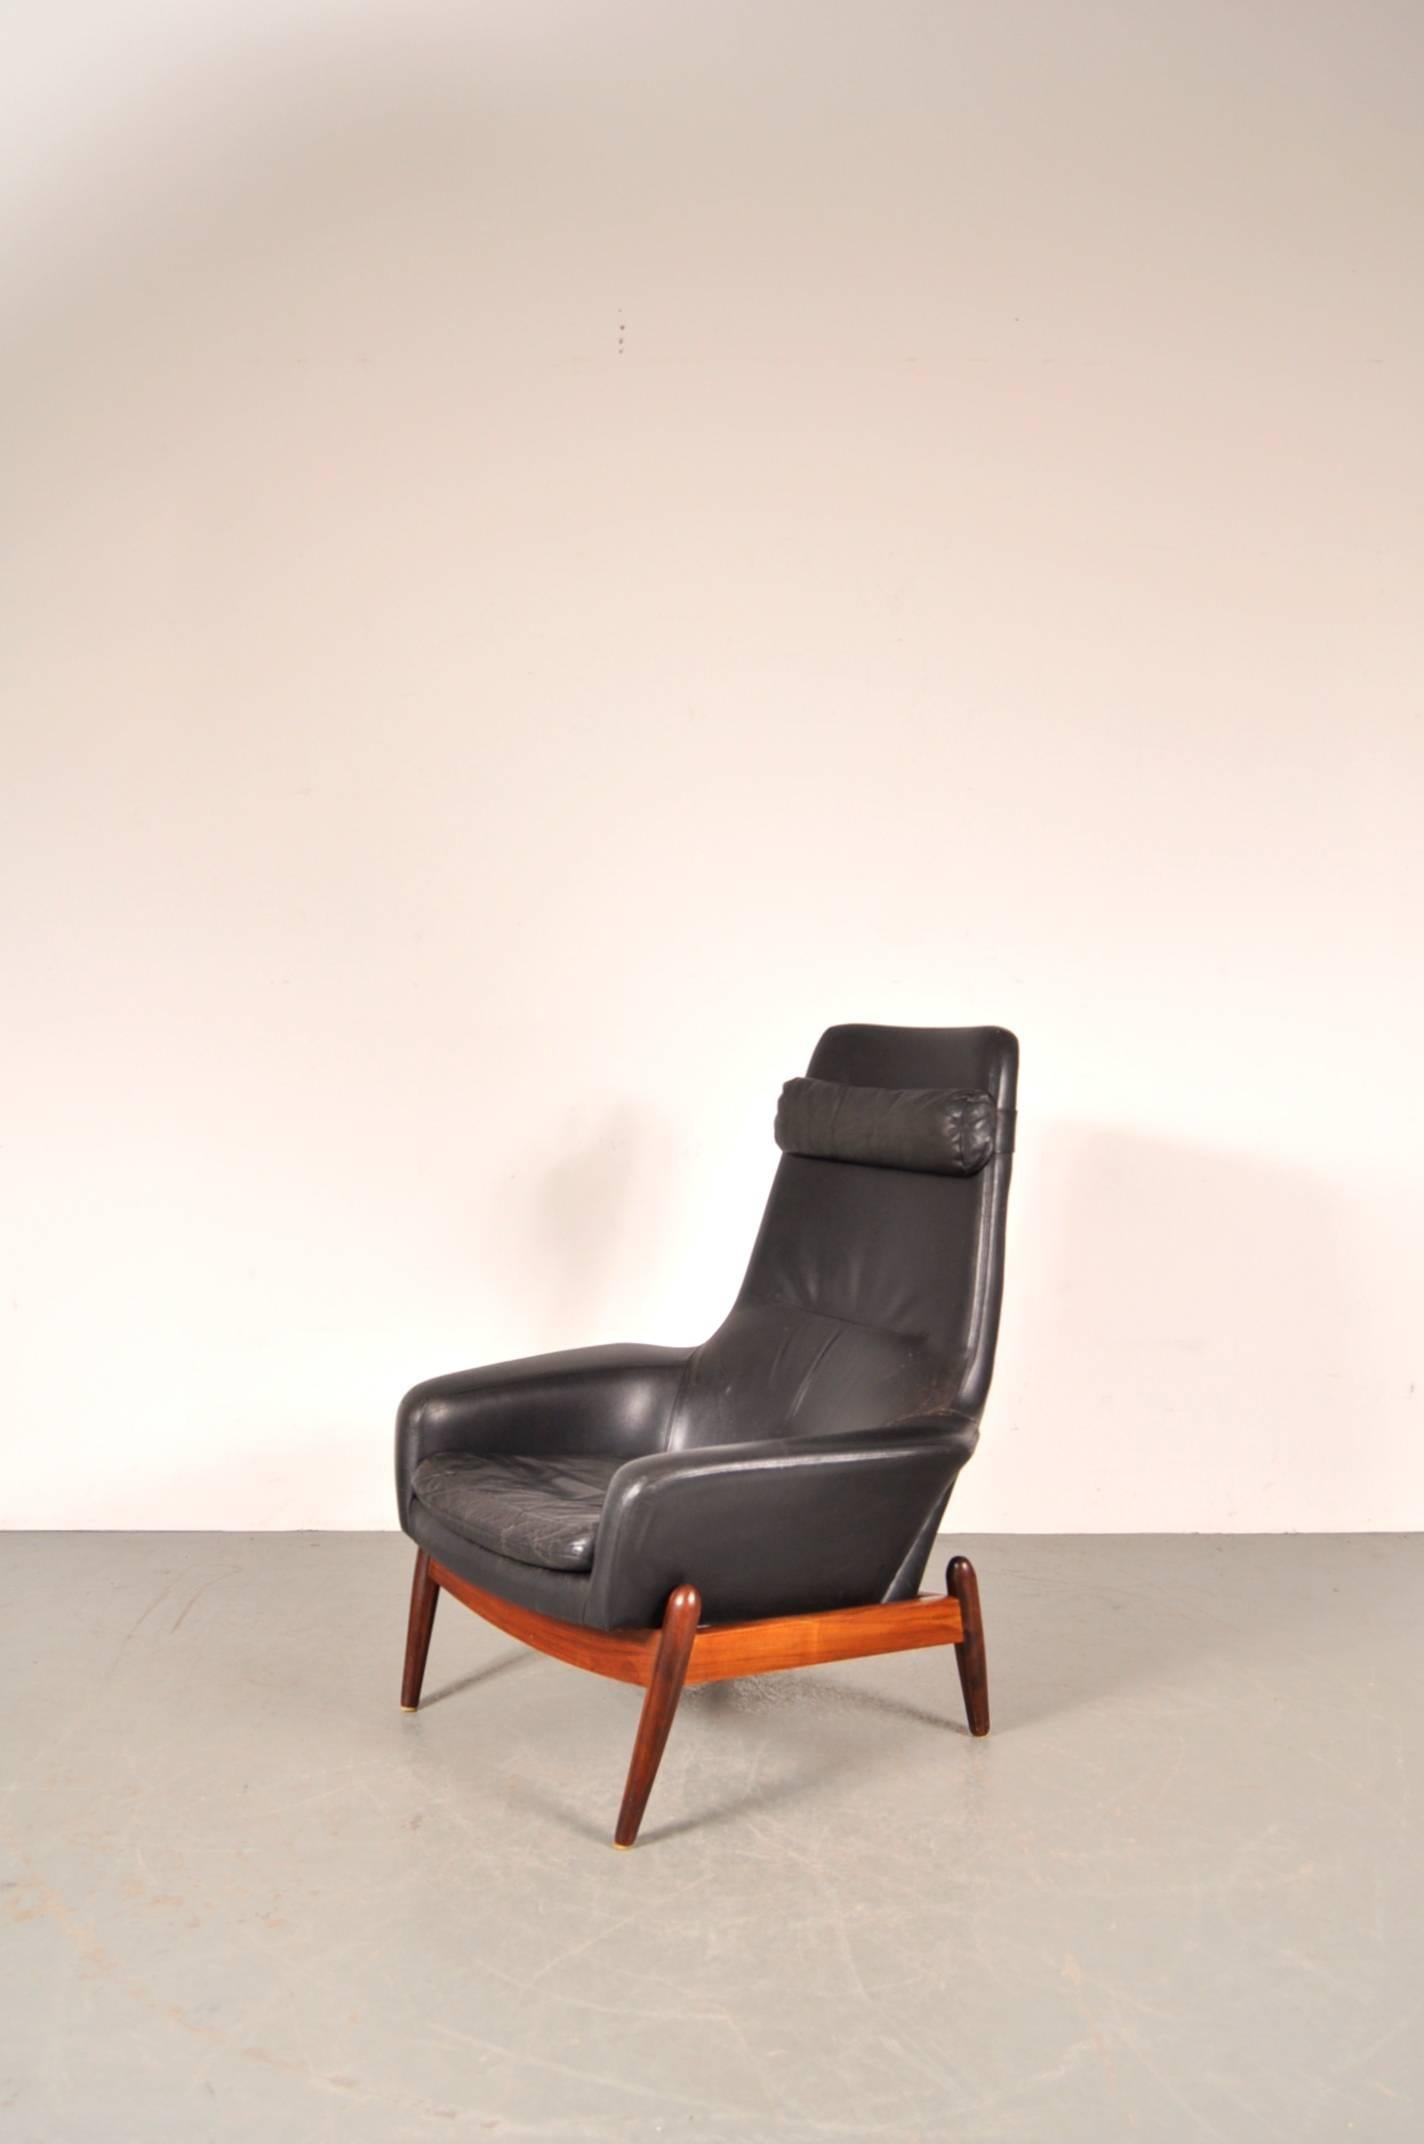 Stunning easy chair designed by Ib Kofod-Larsen, manufactured by Bovenkamp in the Netherlands, circa 1960.

This wonderful piece is upholstered in the highest quality black leather on a beautiful rosewood base. The armrests are also upholstered in